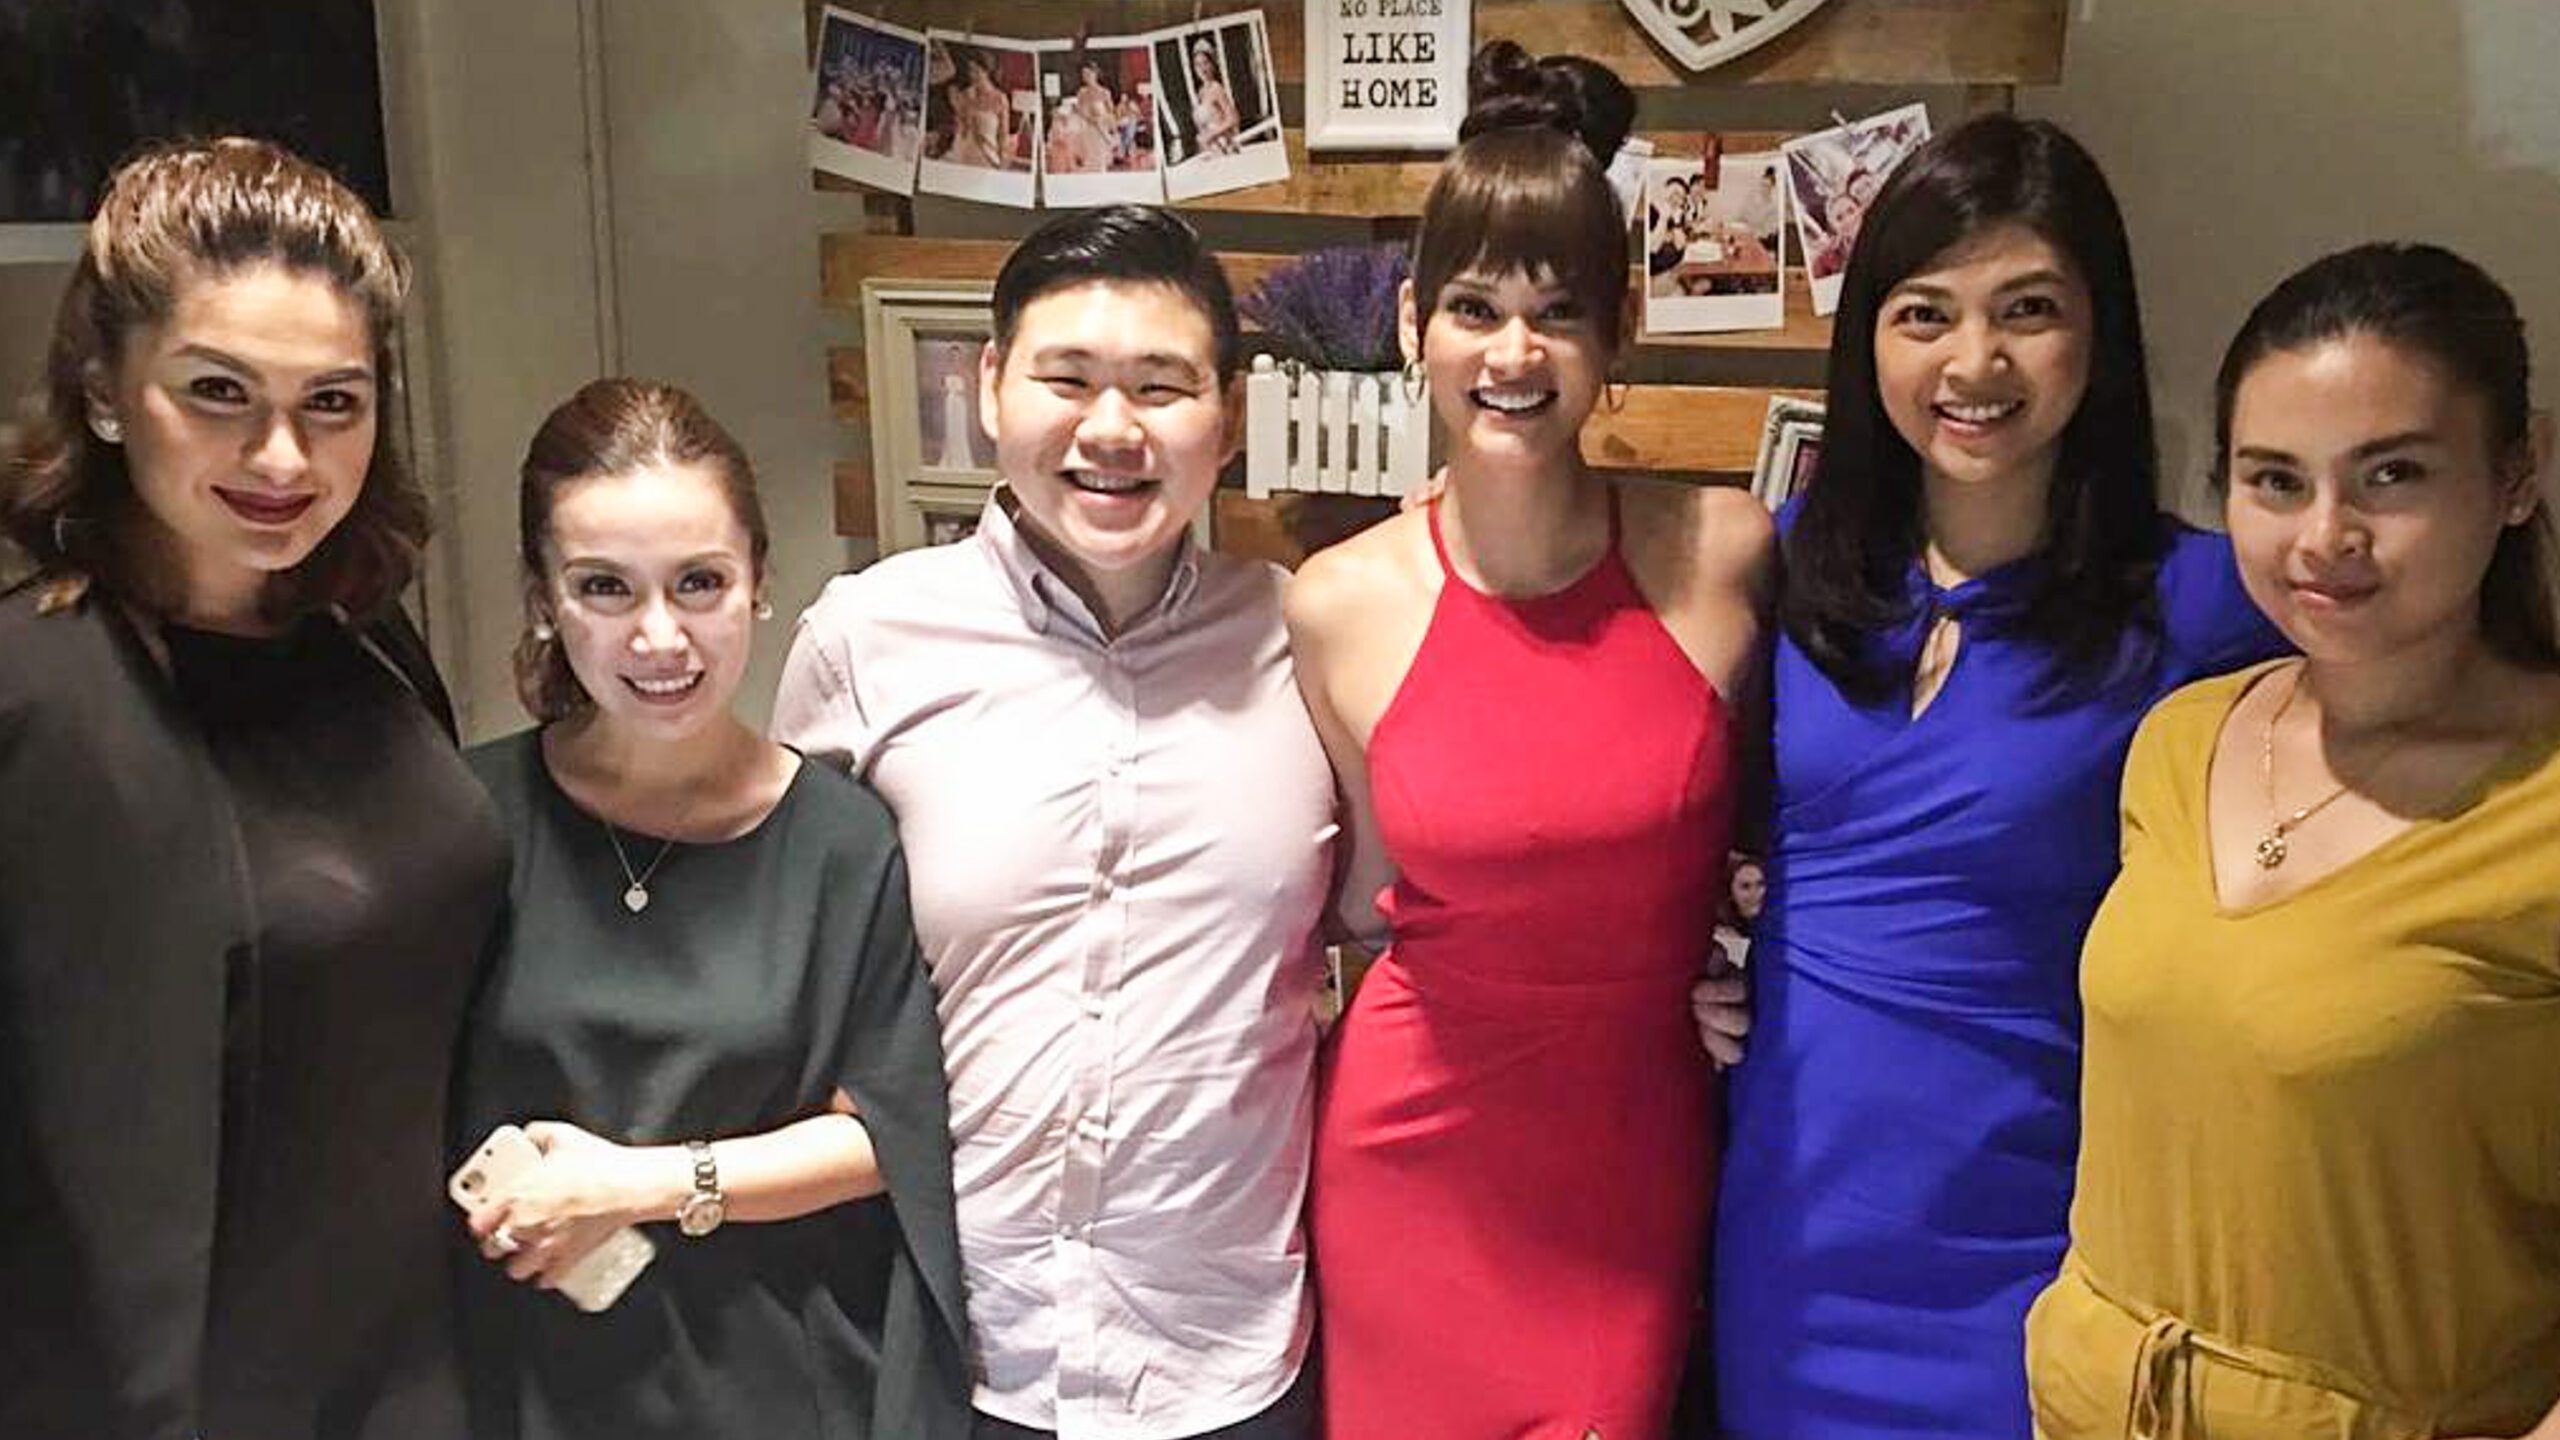 IN PHOTOS: Pia Wurtzbach’s surprise birthday party